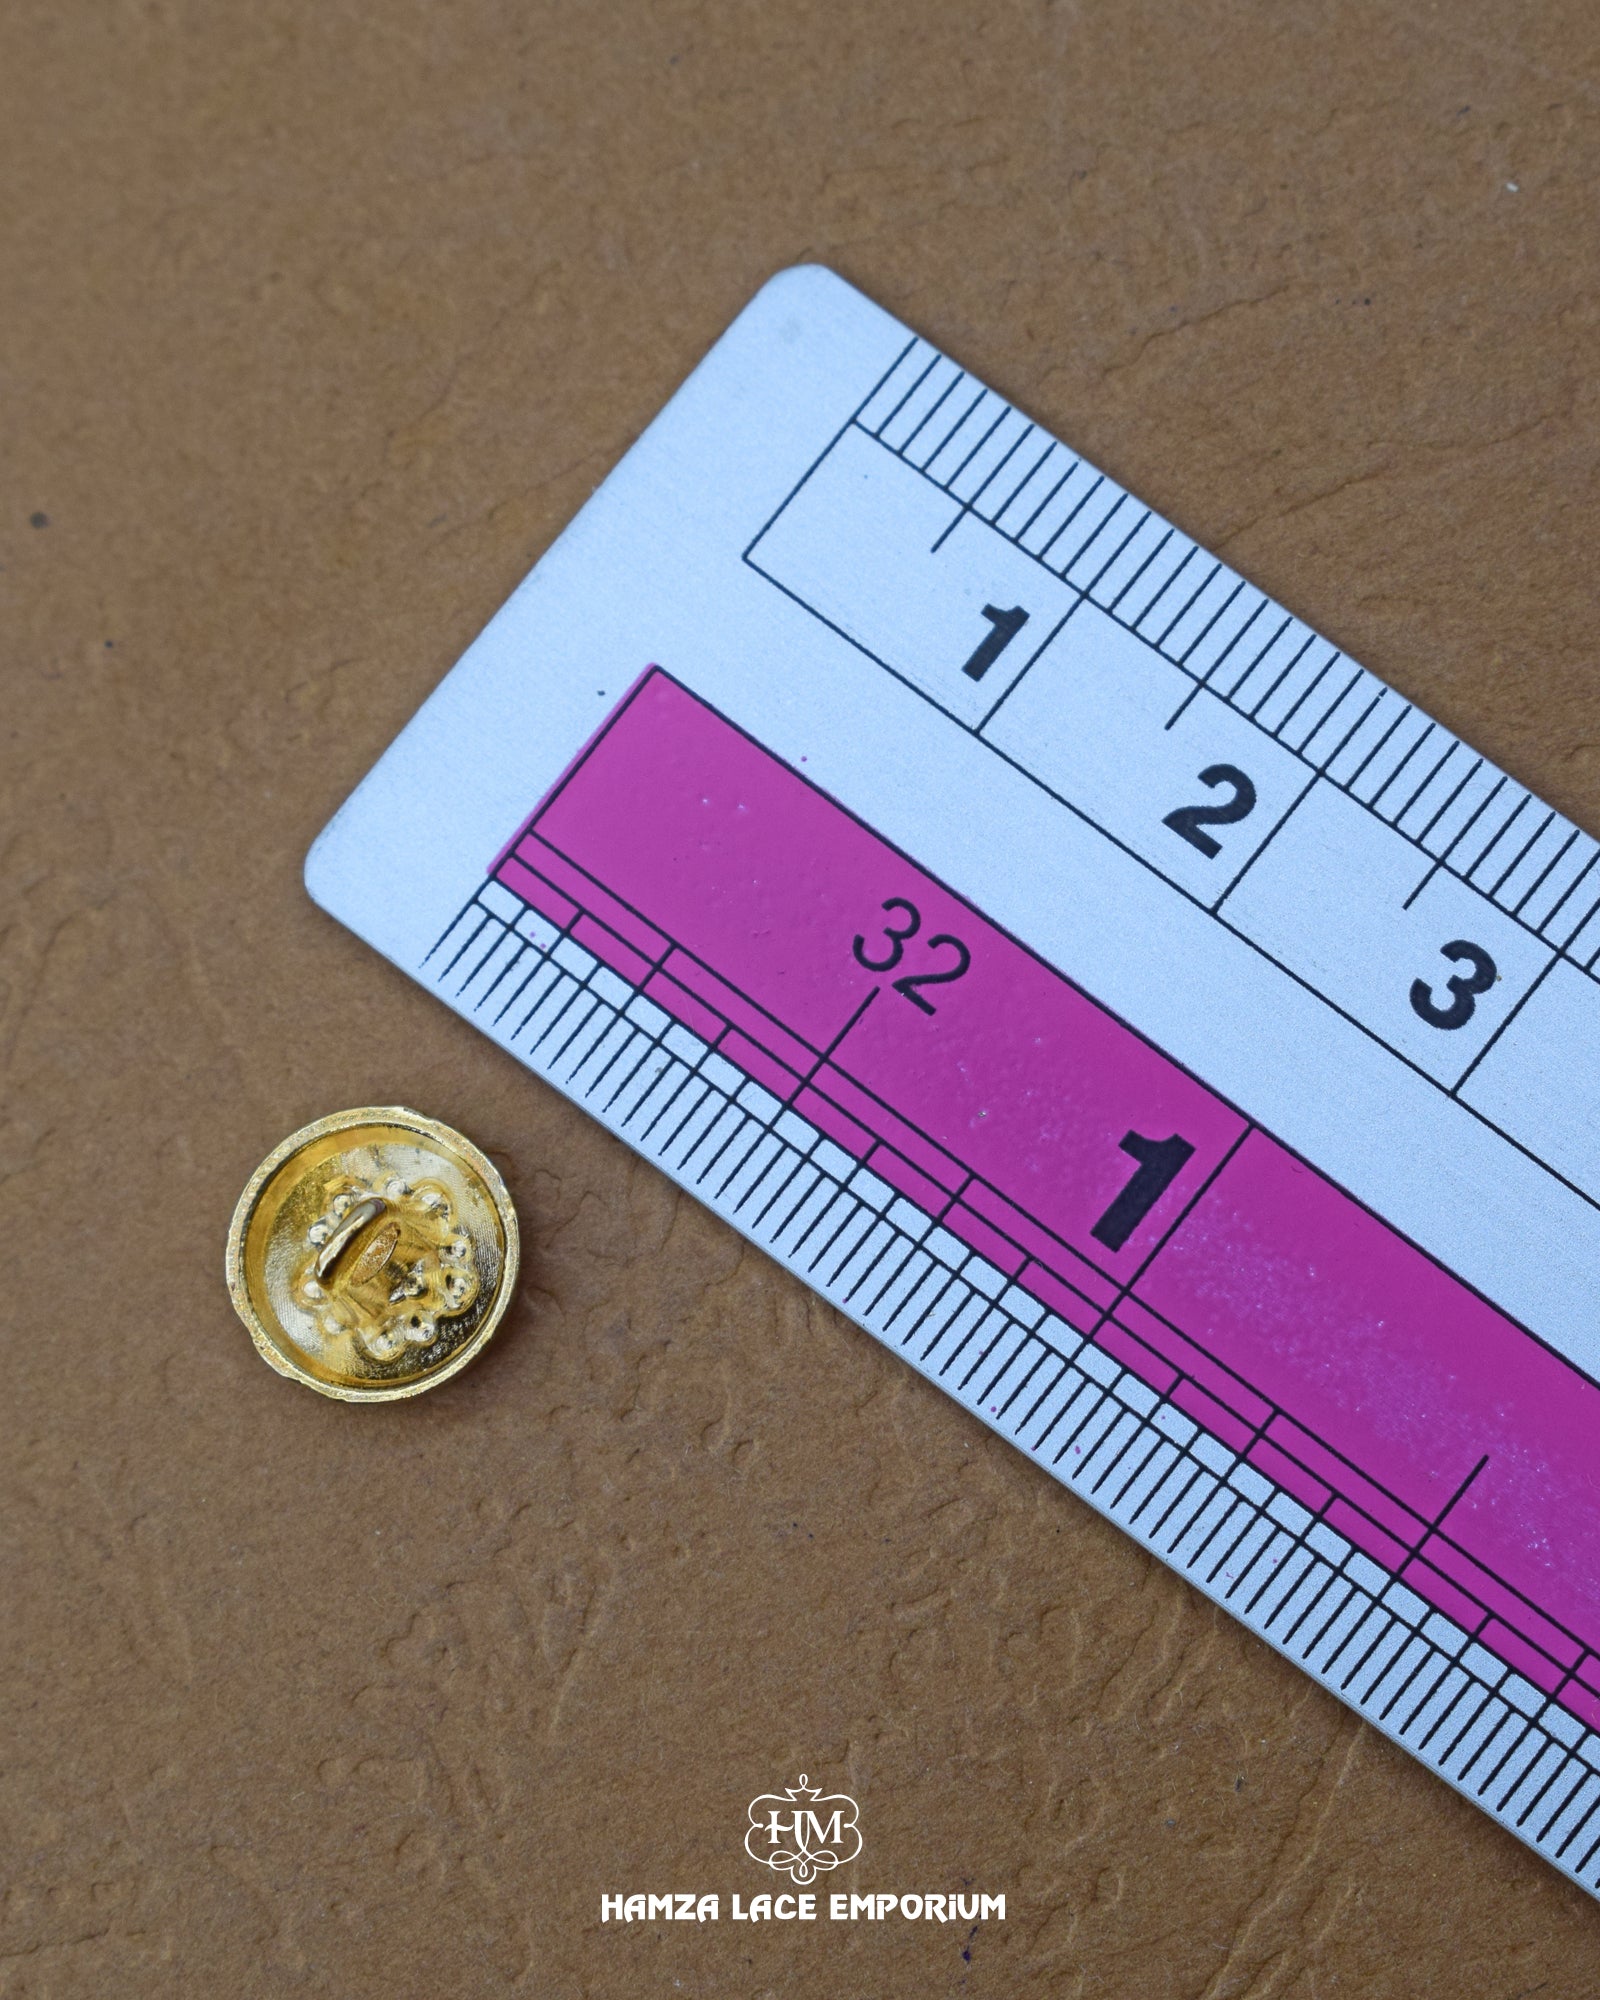 The size of the 'Golden Metal Button MB695' is measured by using a ruler